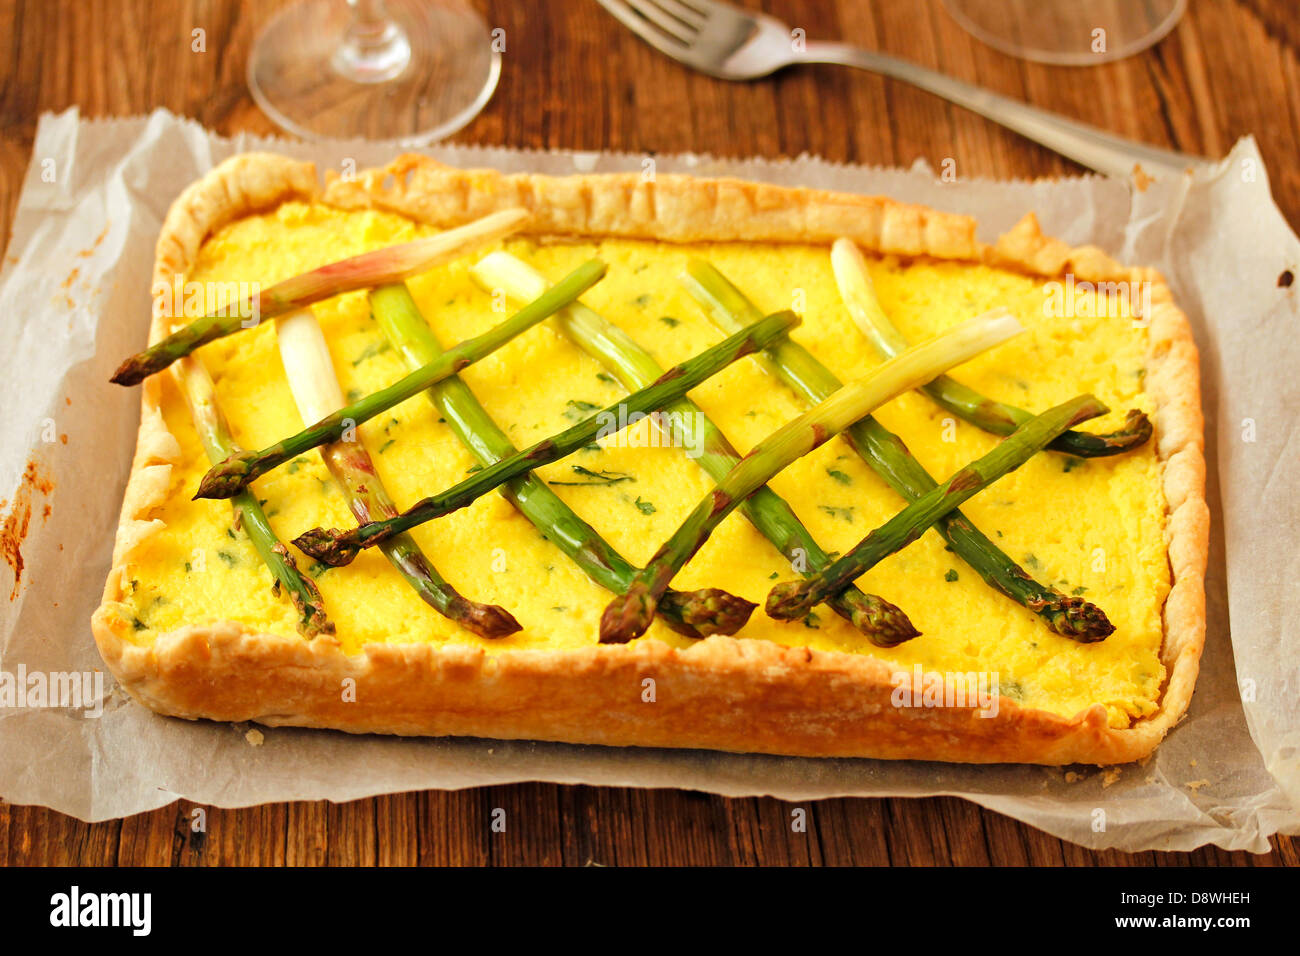 Puff pastry with cheese and asparagus. Recipe available. Stock Photo